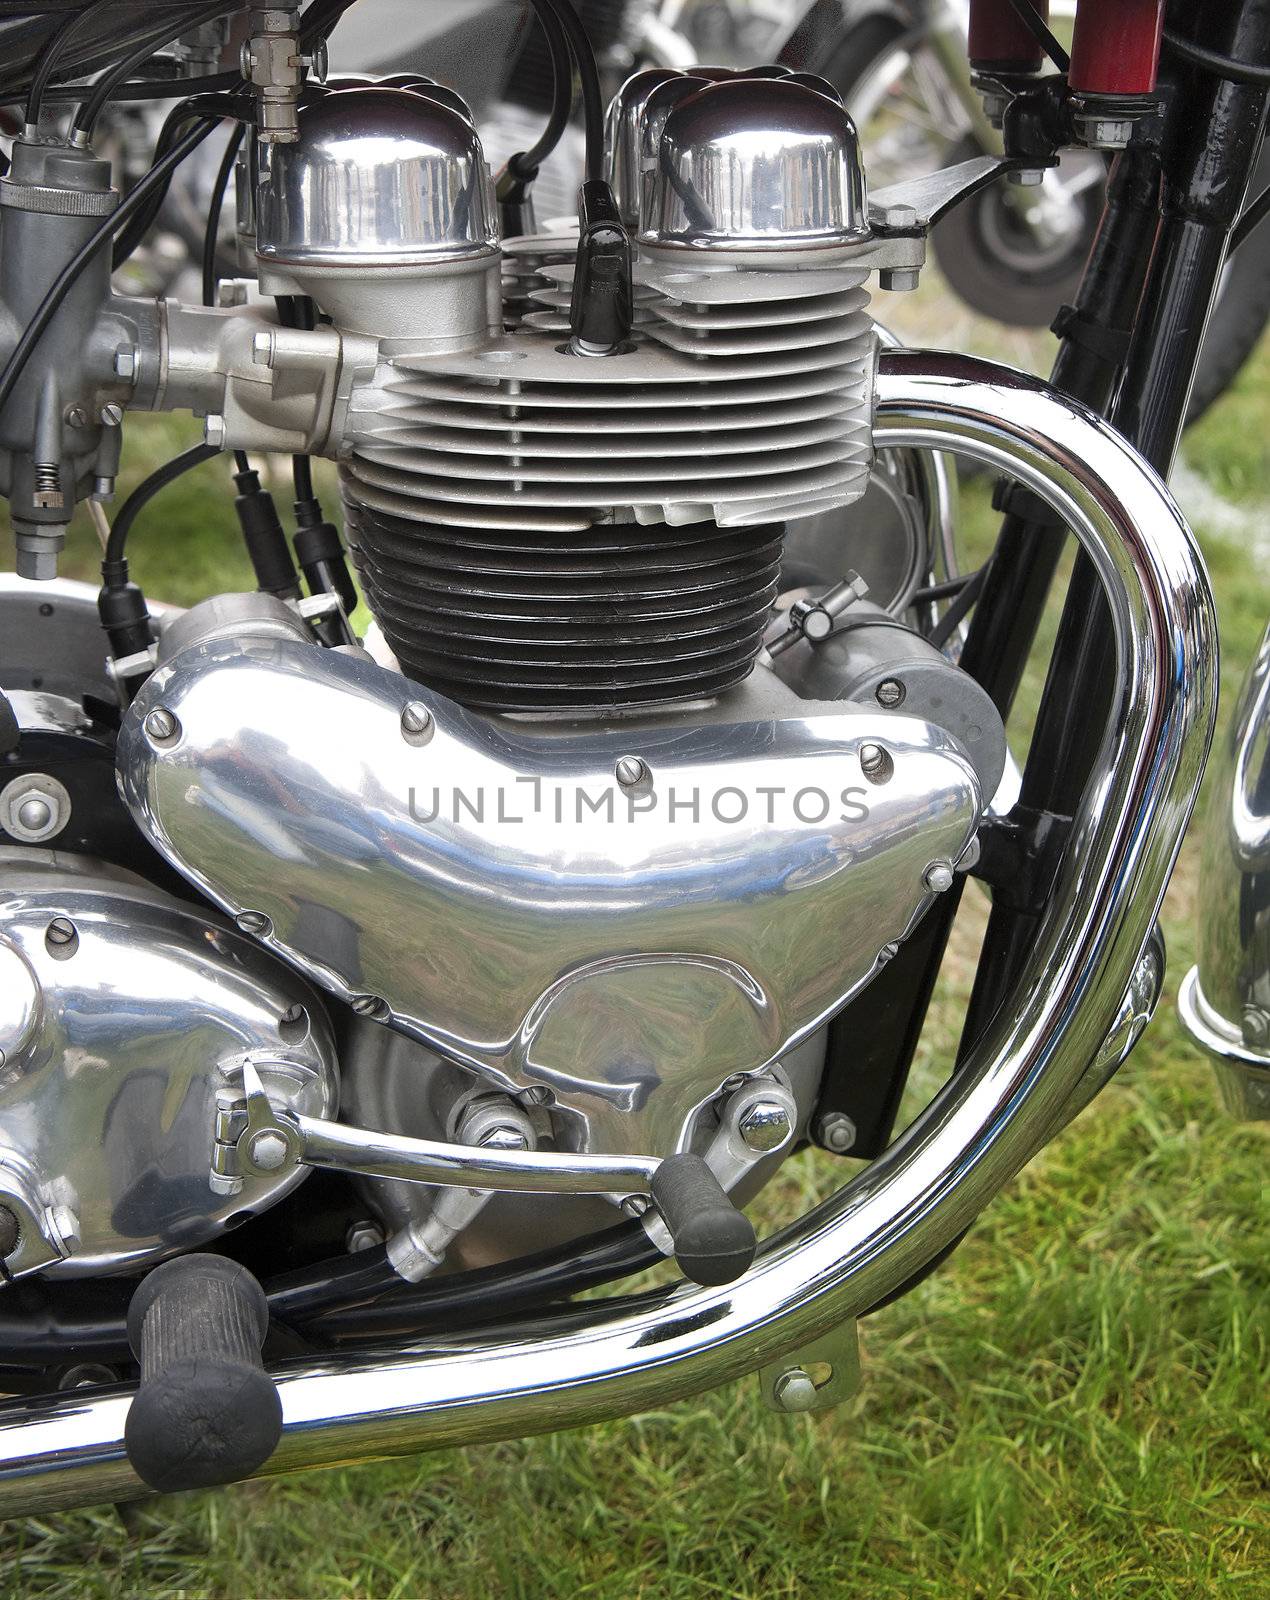 British vertical twin motorcycle engine from the 1950s